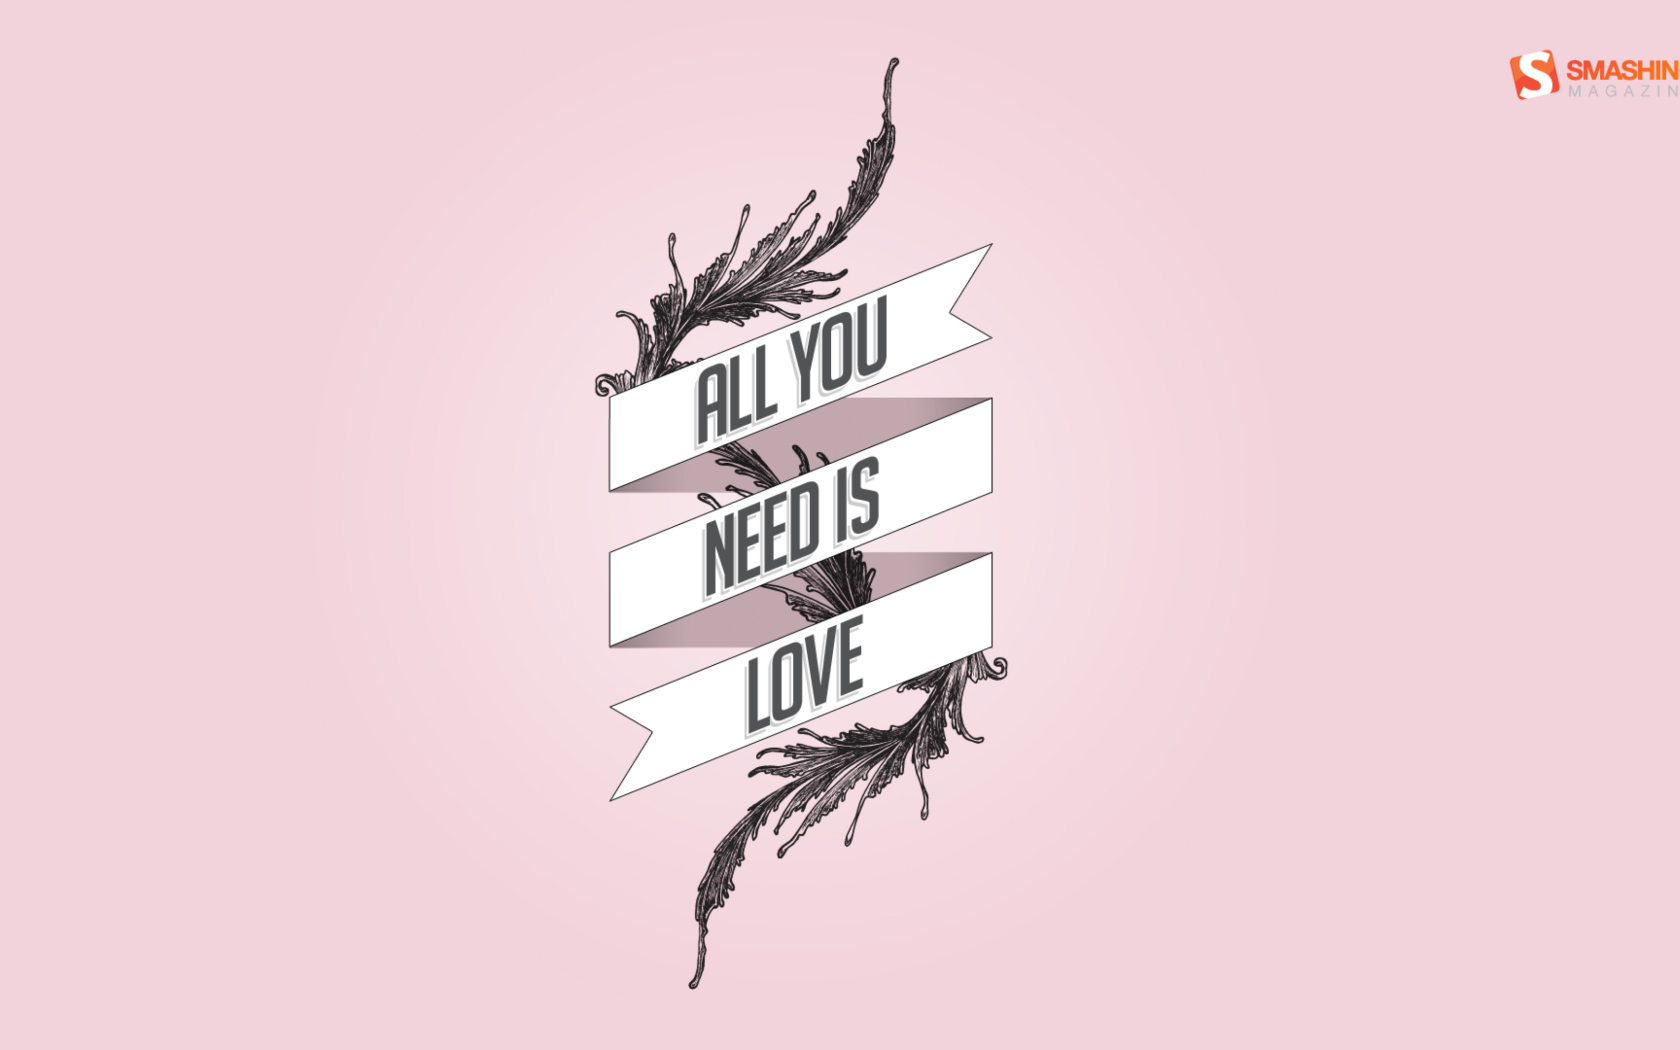 All You Need Is Love wallpaper 1680x1050